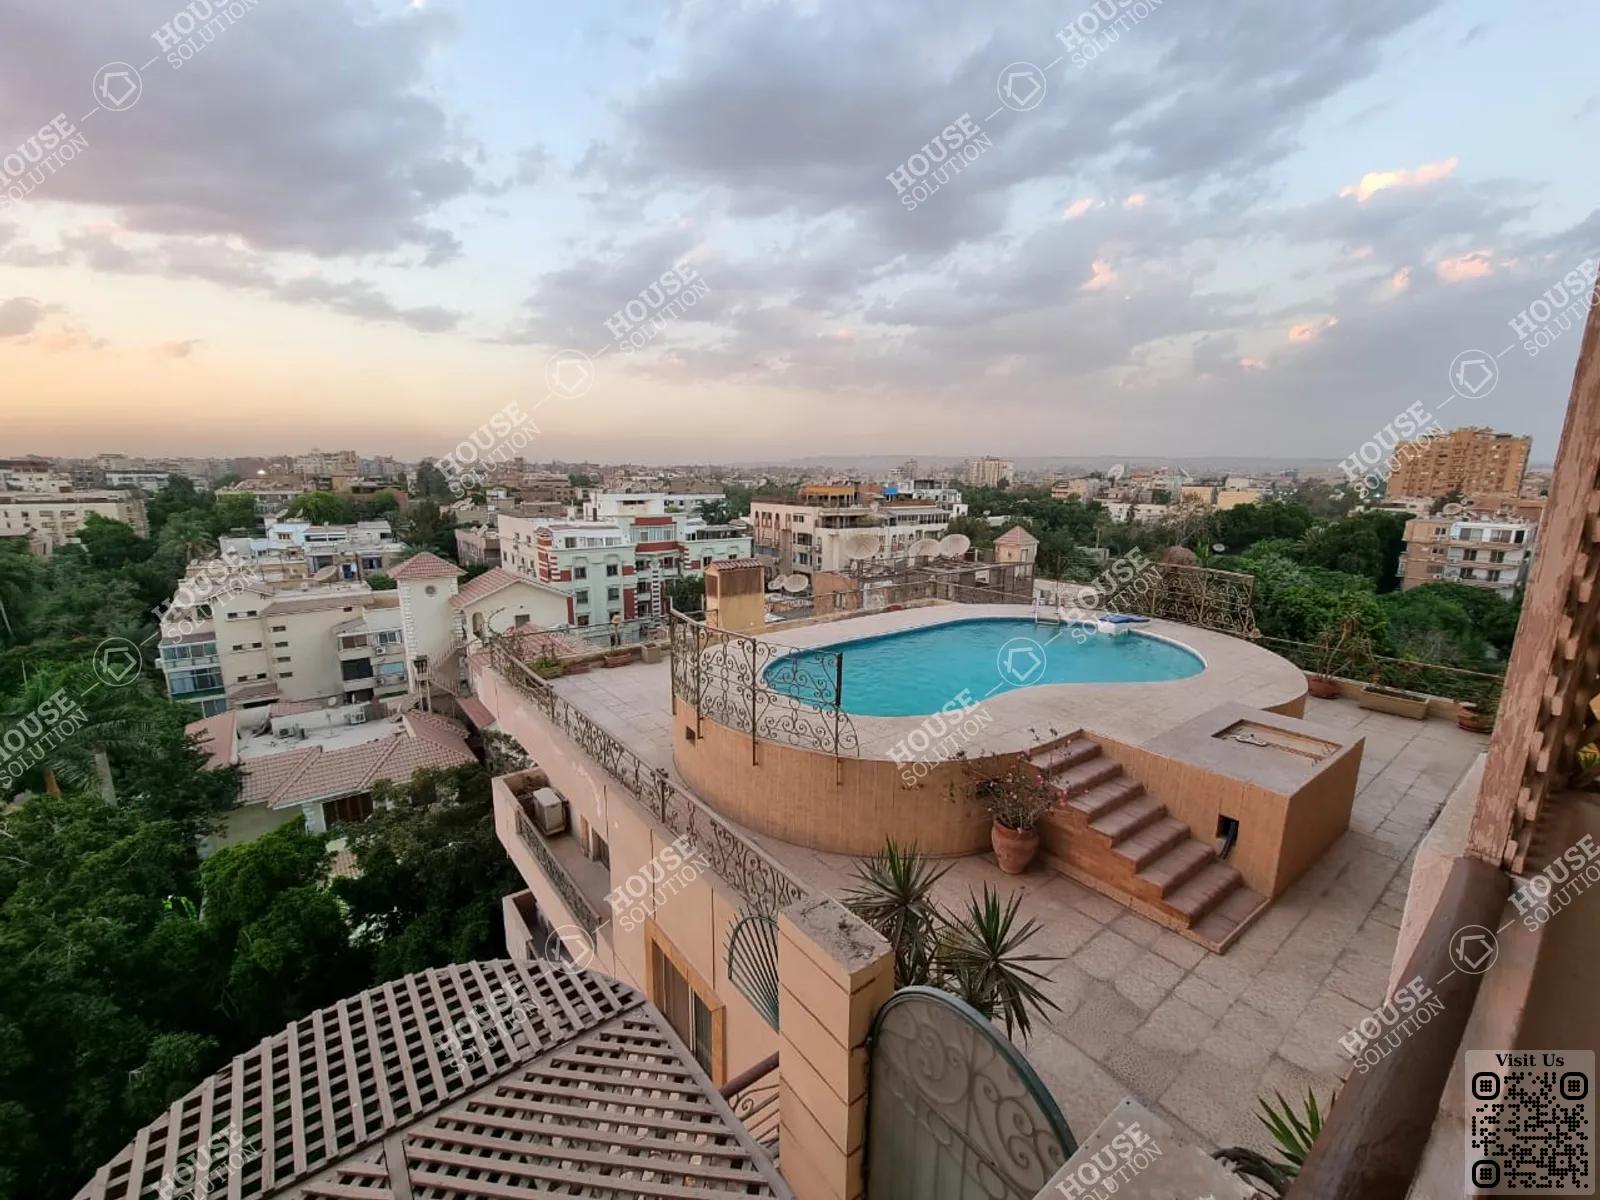 SHARED SWIMMING POOL  @ Apartments For Rent In Maadi Maadi Sarayat Area: 200 m² consists of 4 Bedrooms 2 Bathrooms Furnished 5 stars #5081-1